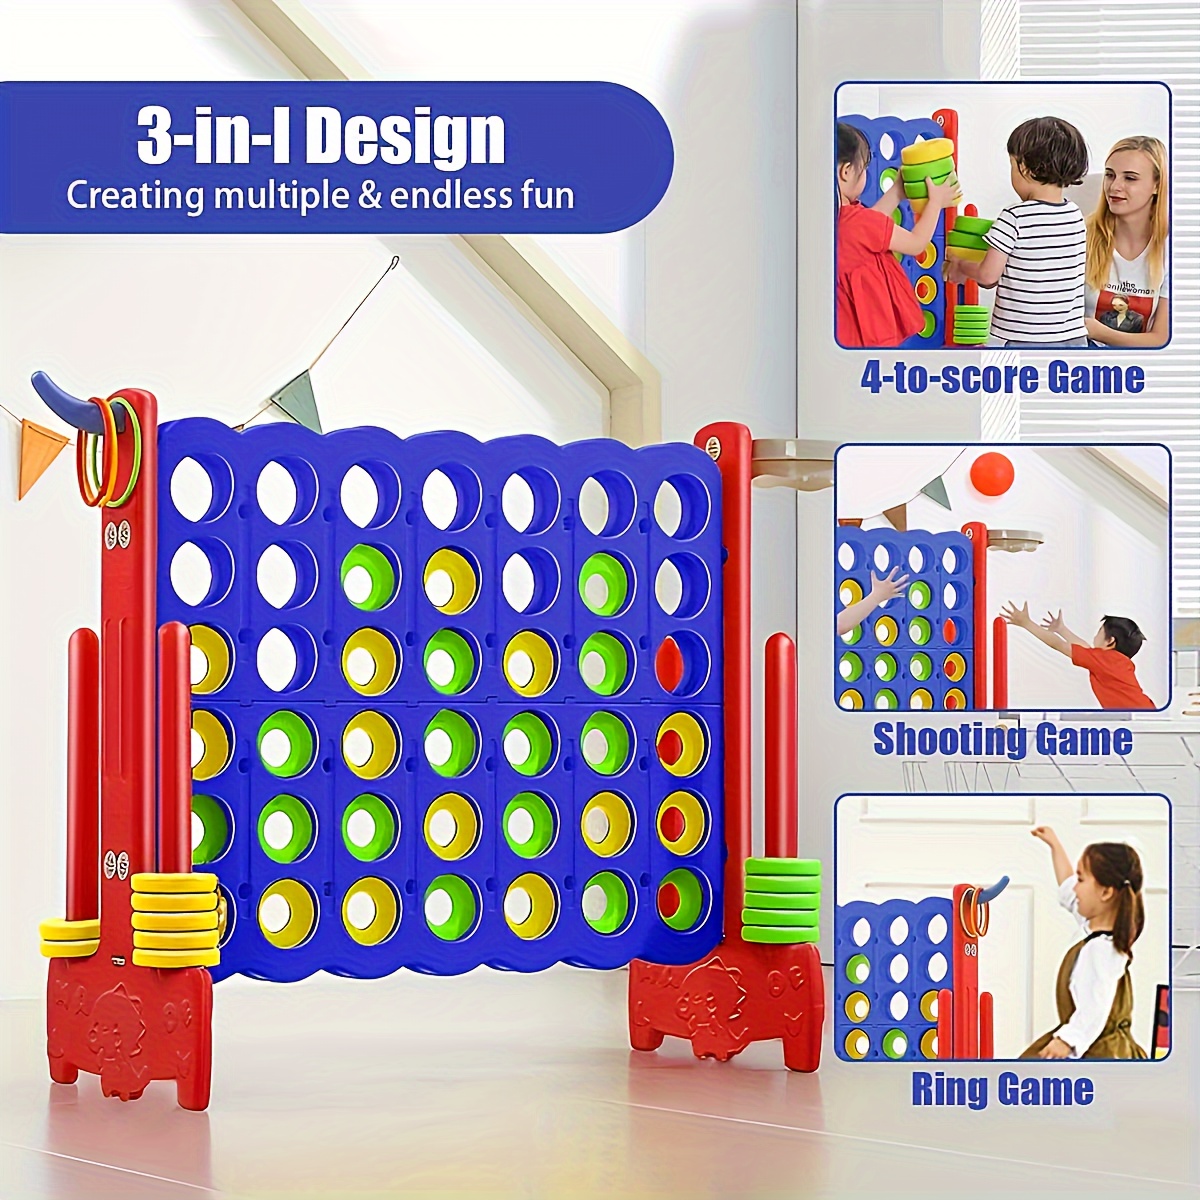 

Giant 3-in-1 Game Board 4-point Mega Game/basketball Hoop, Throwing Ring Easy To Install